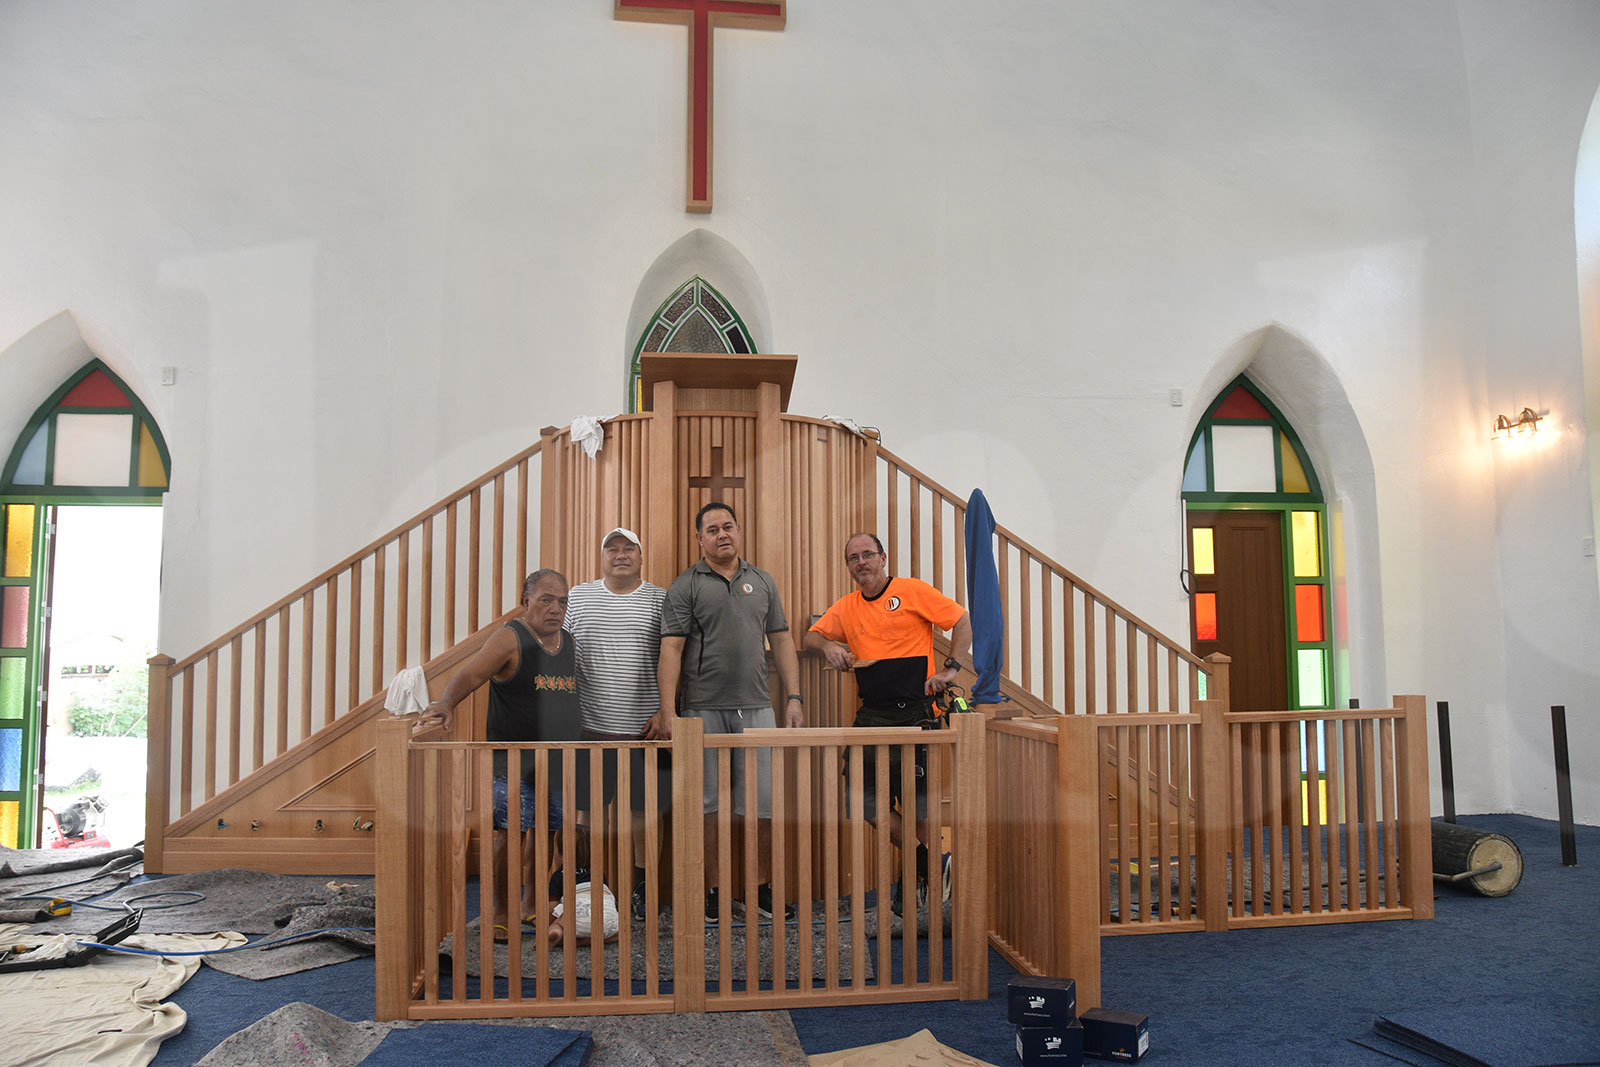 Church renovation nearing completion